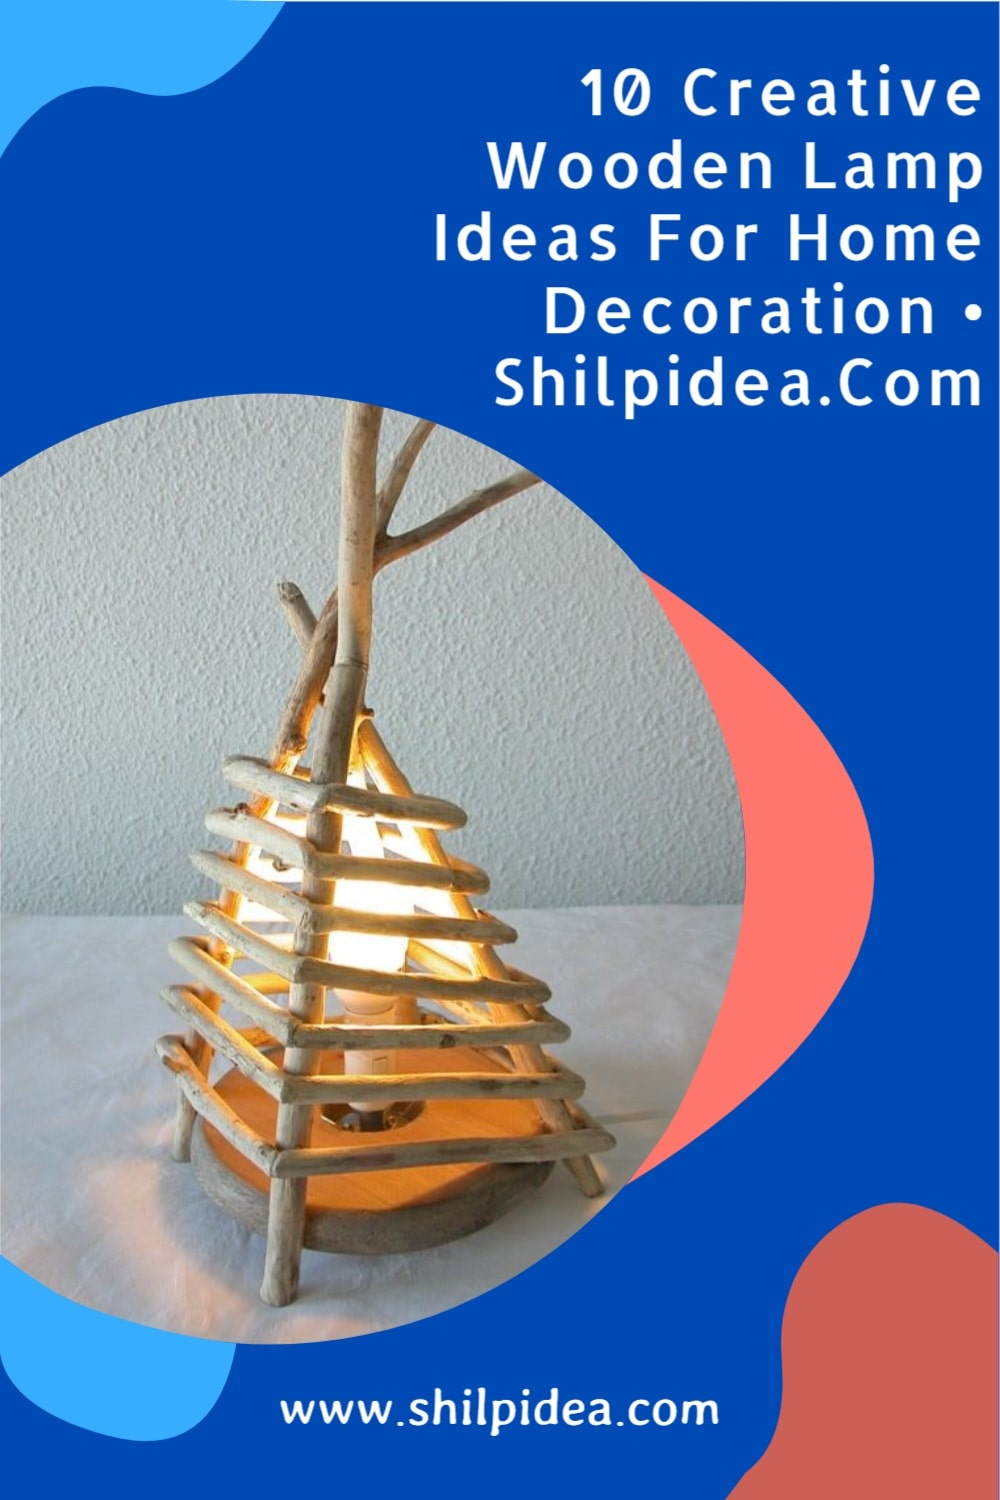 Creative-Wooden-Lamp-Ideas-For-Home-Decoration-shilpidea